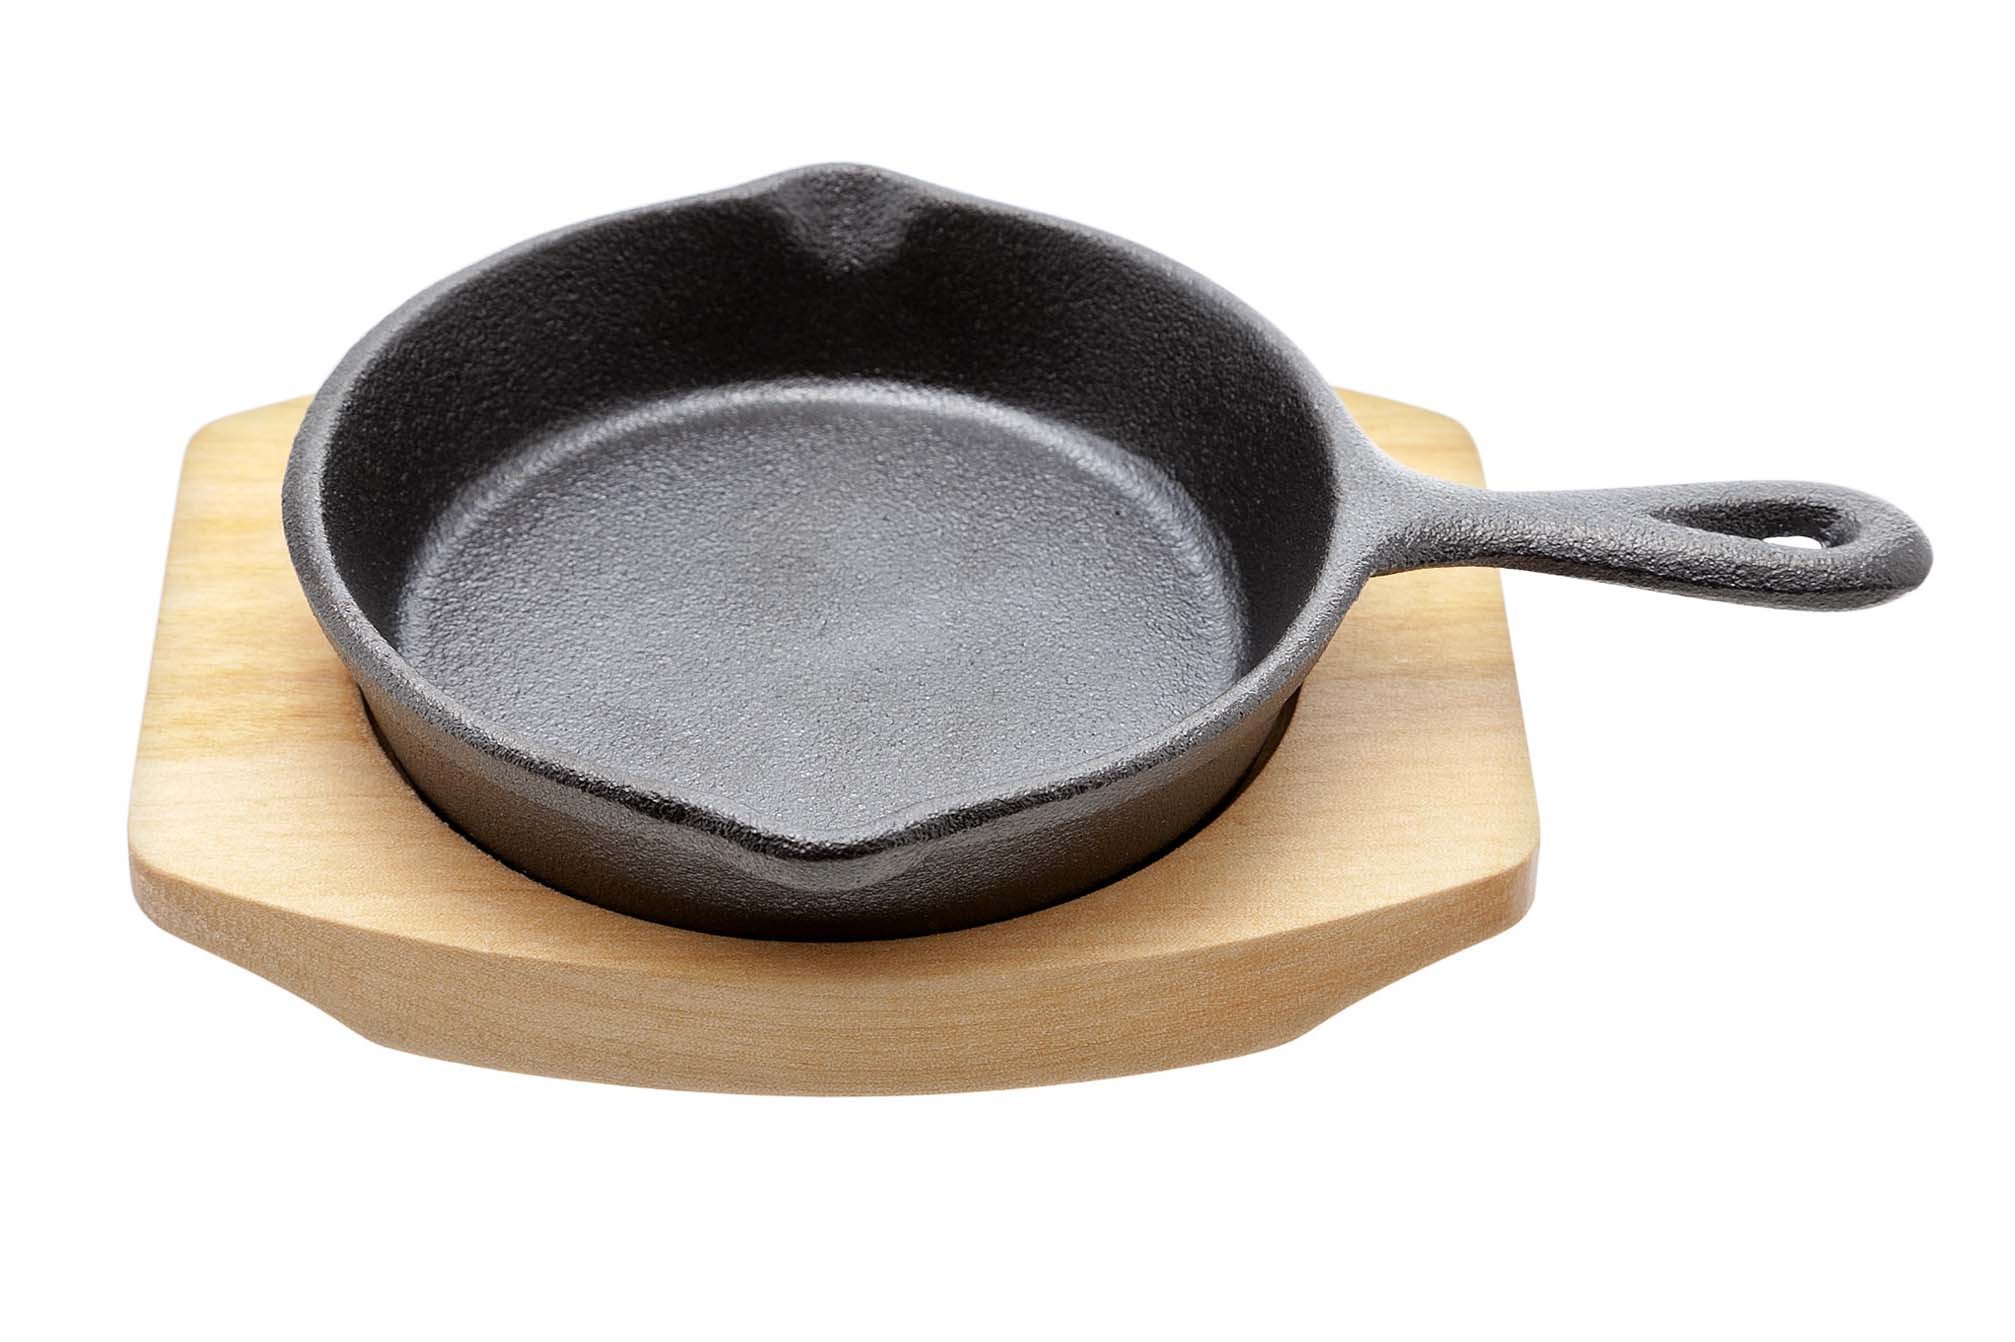 CAST IRON FRYPAN 10.5CM ON WOODEN BOARD